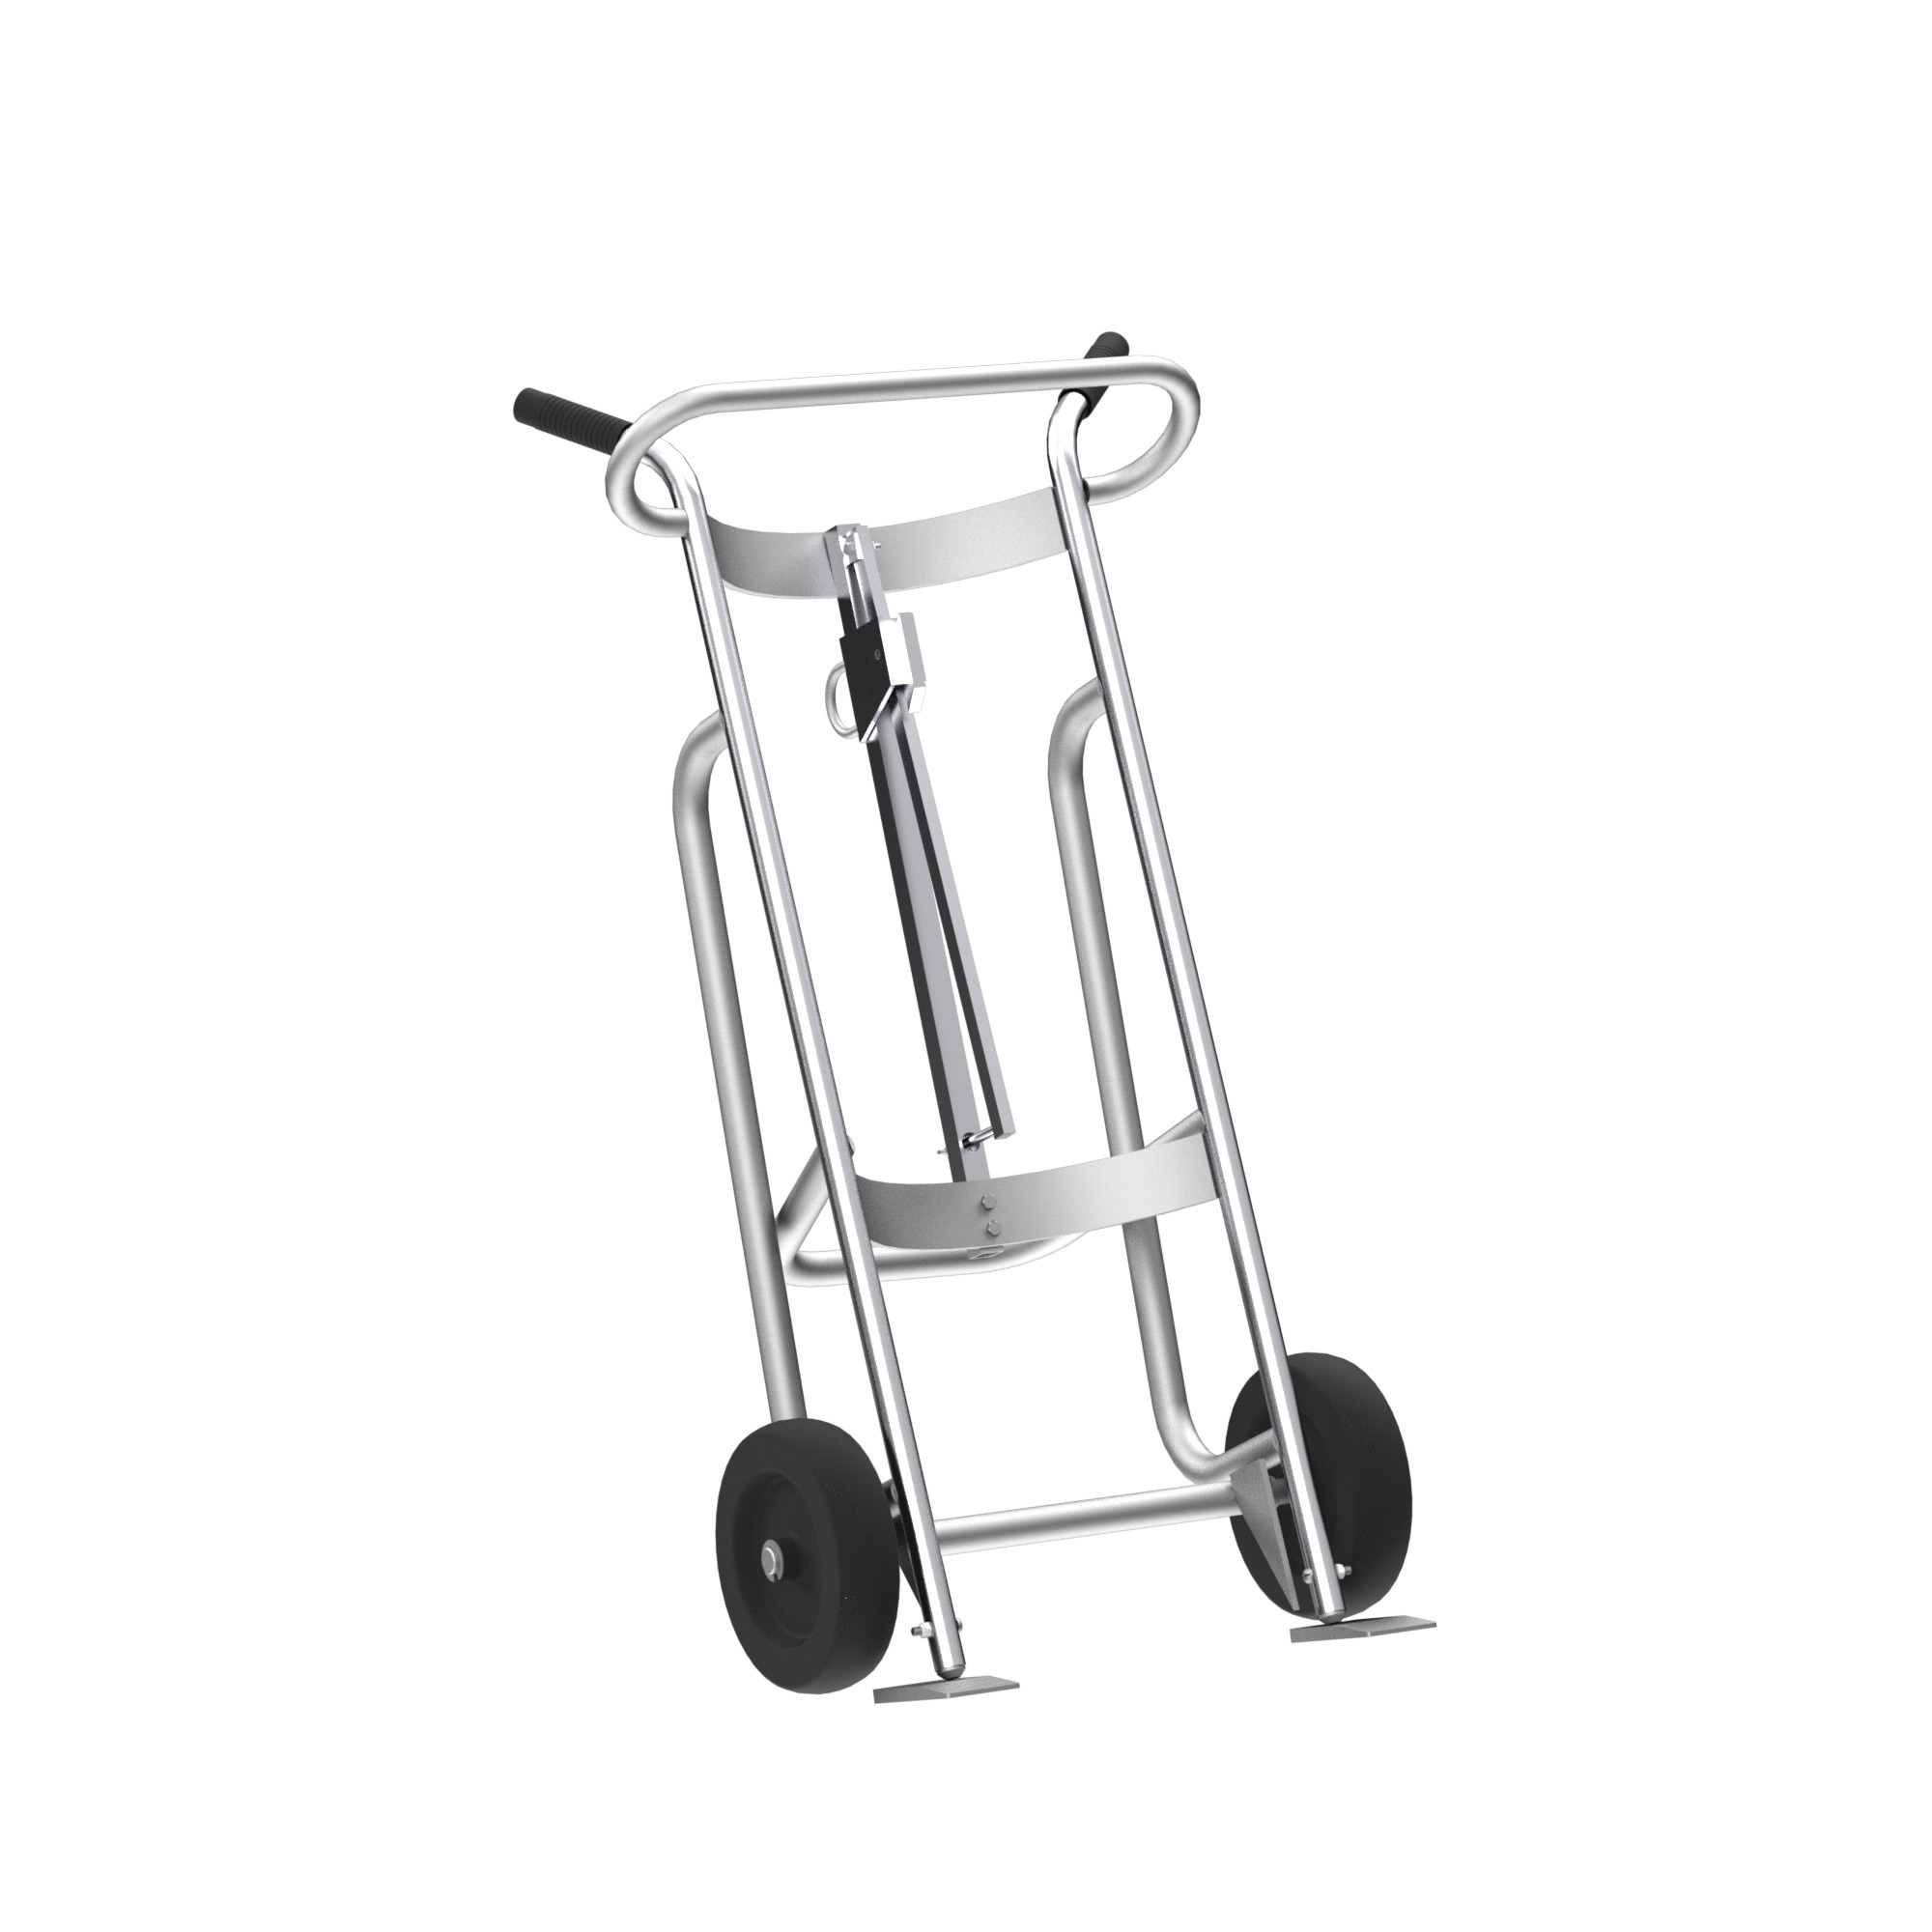 Valley Craft, 2-Wheel Drum Hand Truck, Load Capacity 1000 lb, Height 52 in, Material Aluminum, Model F81770A3